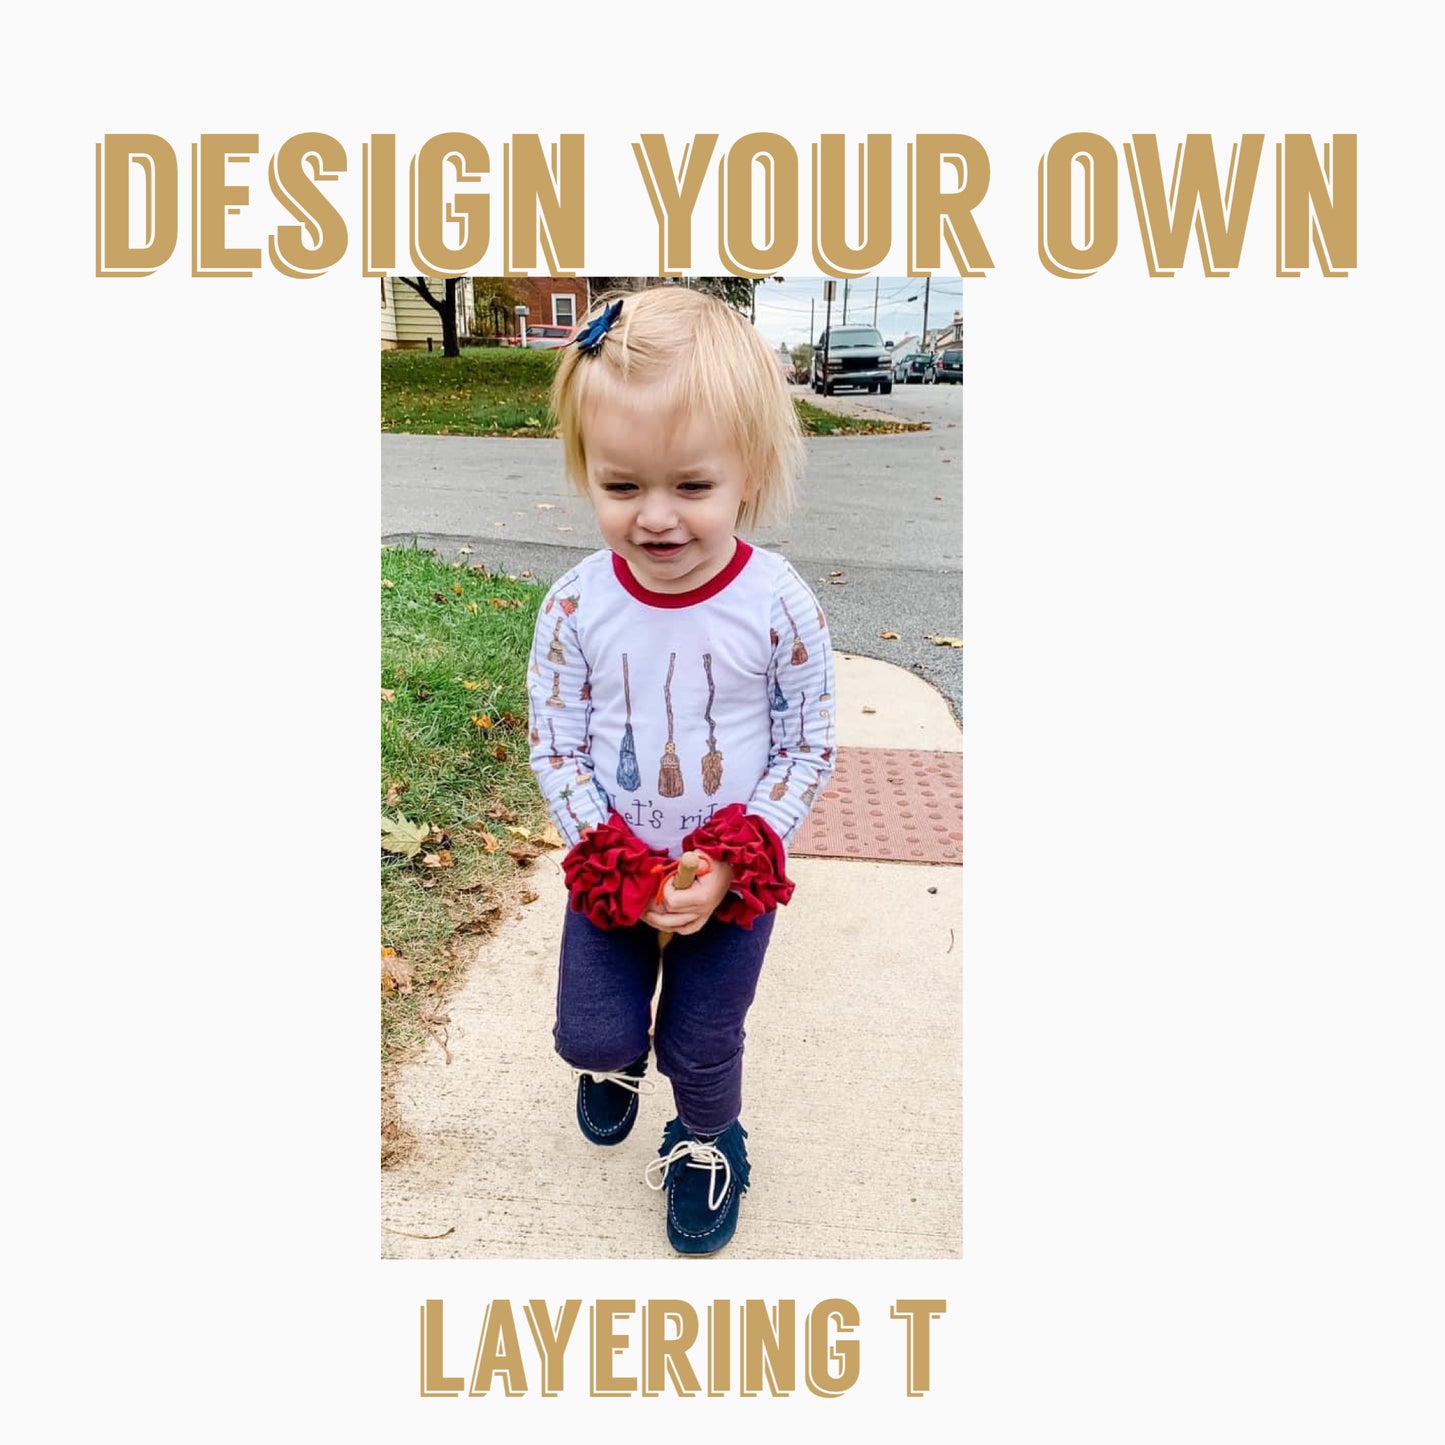 Design your own| Layering T